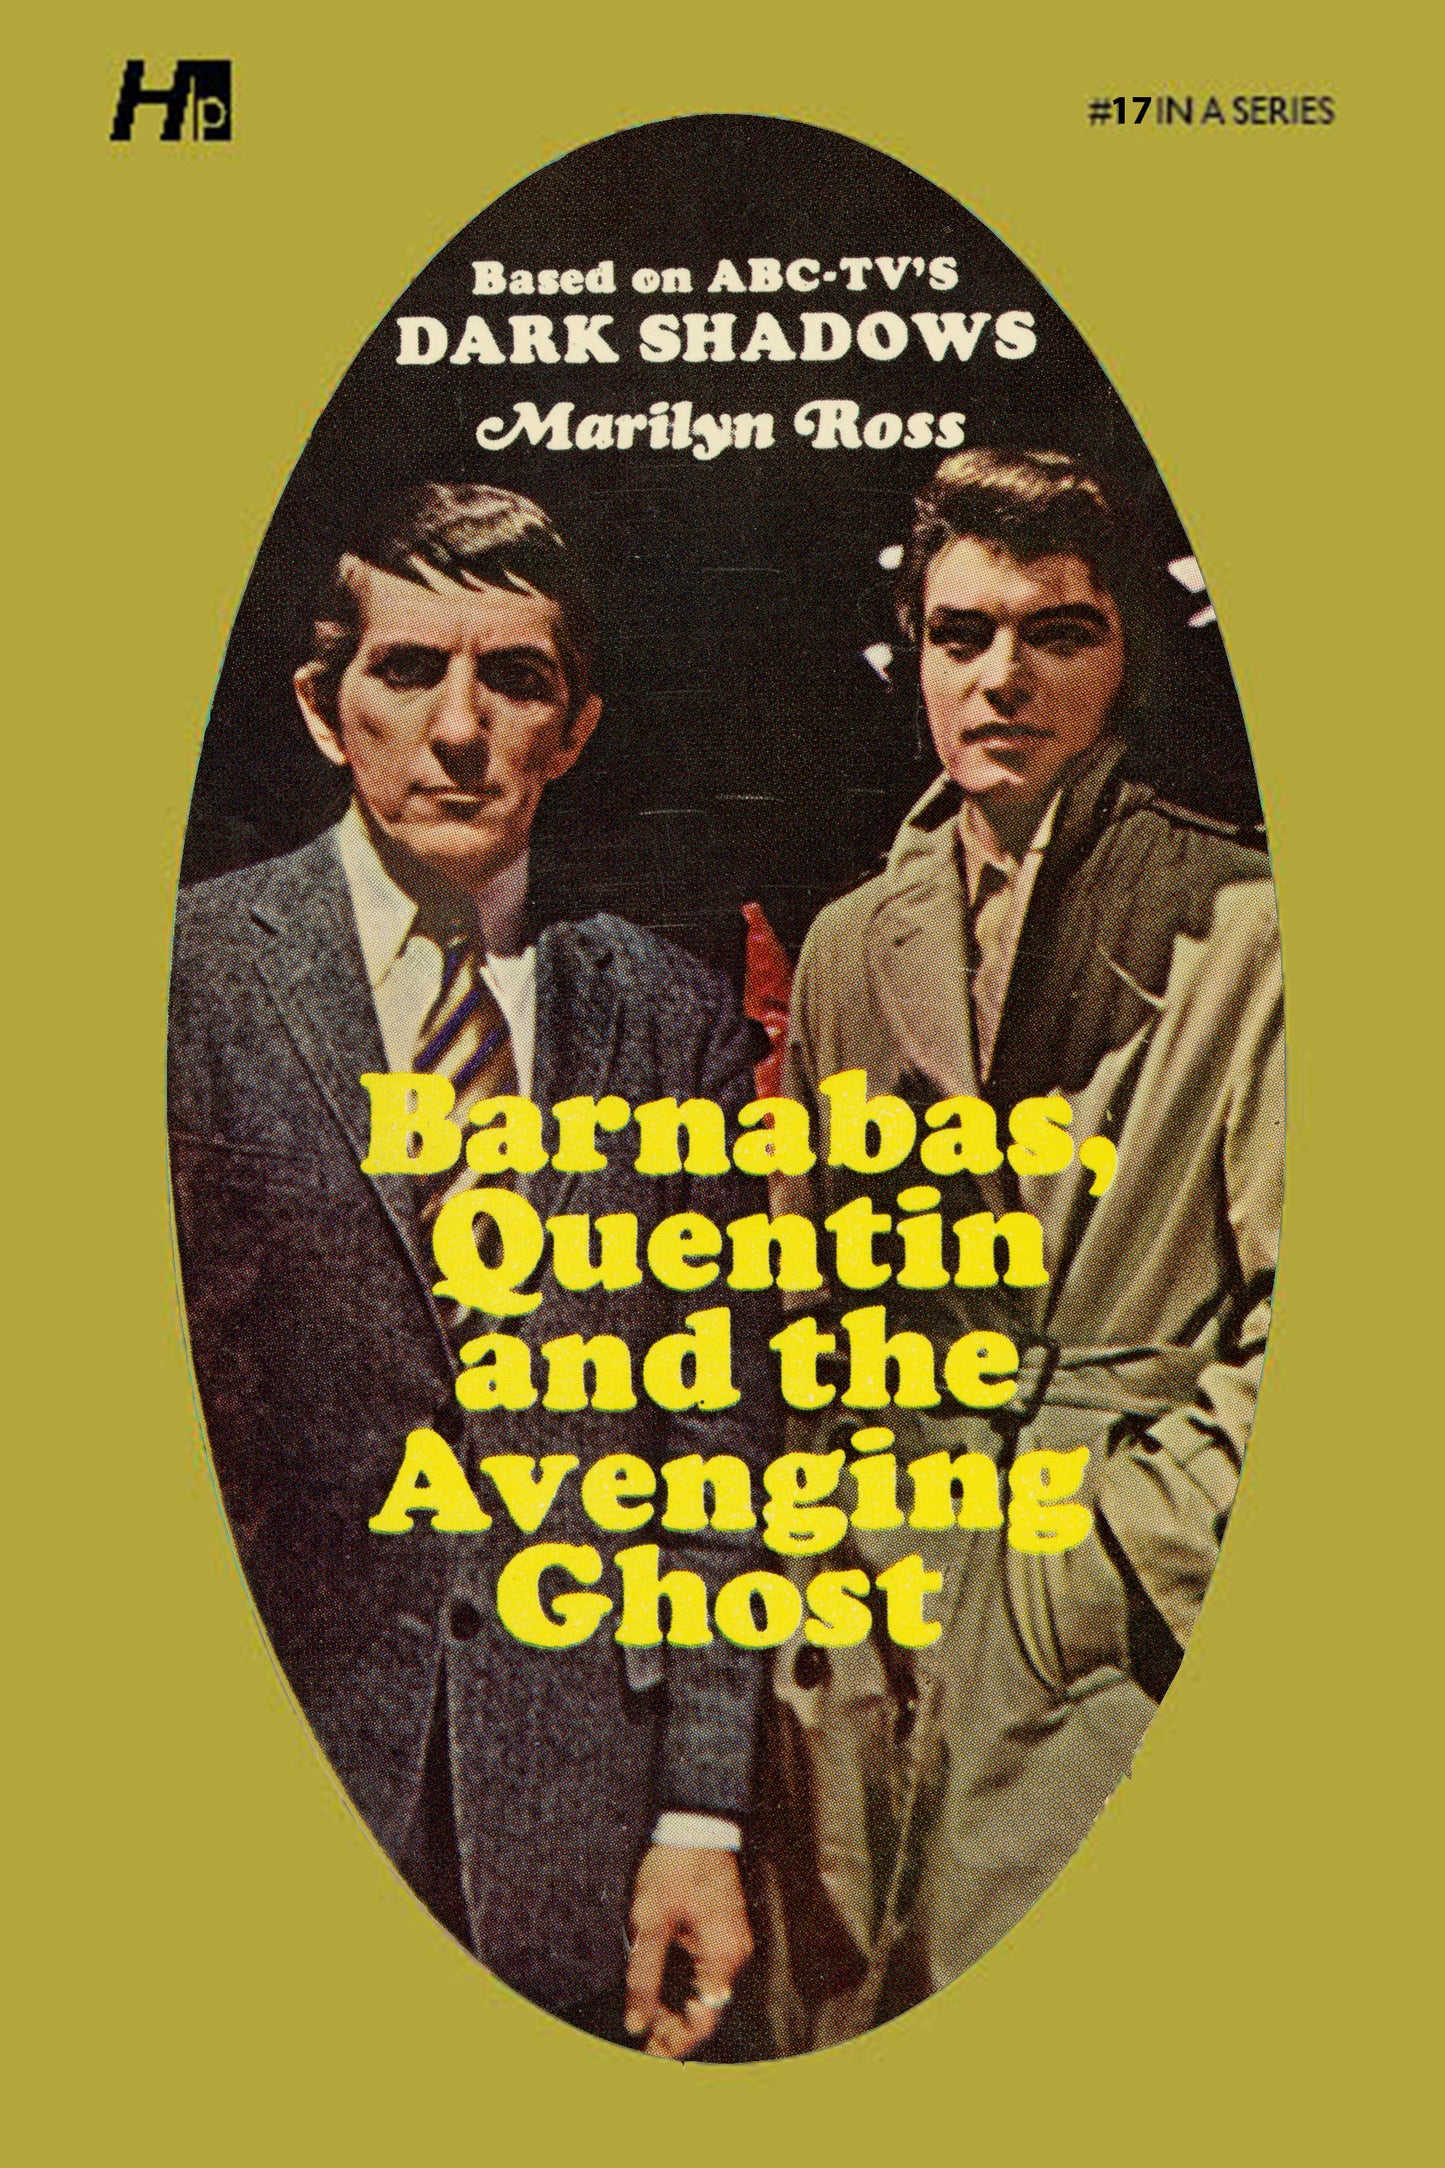 Dark Shadows #17: Barnabas, Quentin and the Avenging Ghost [Paperback]